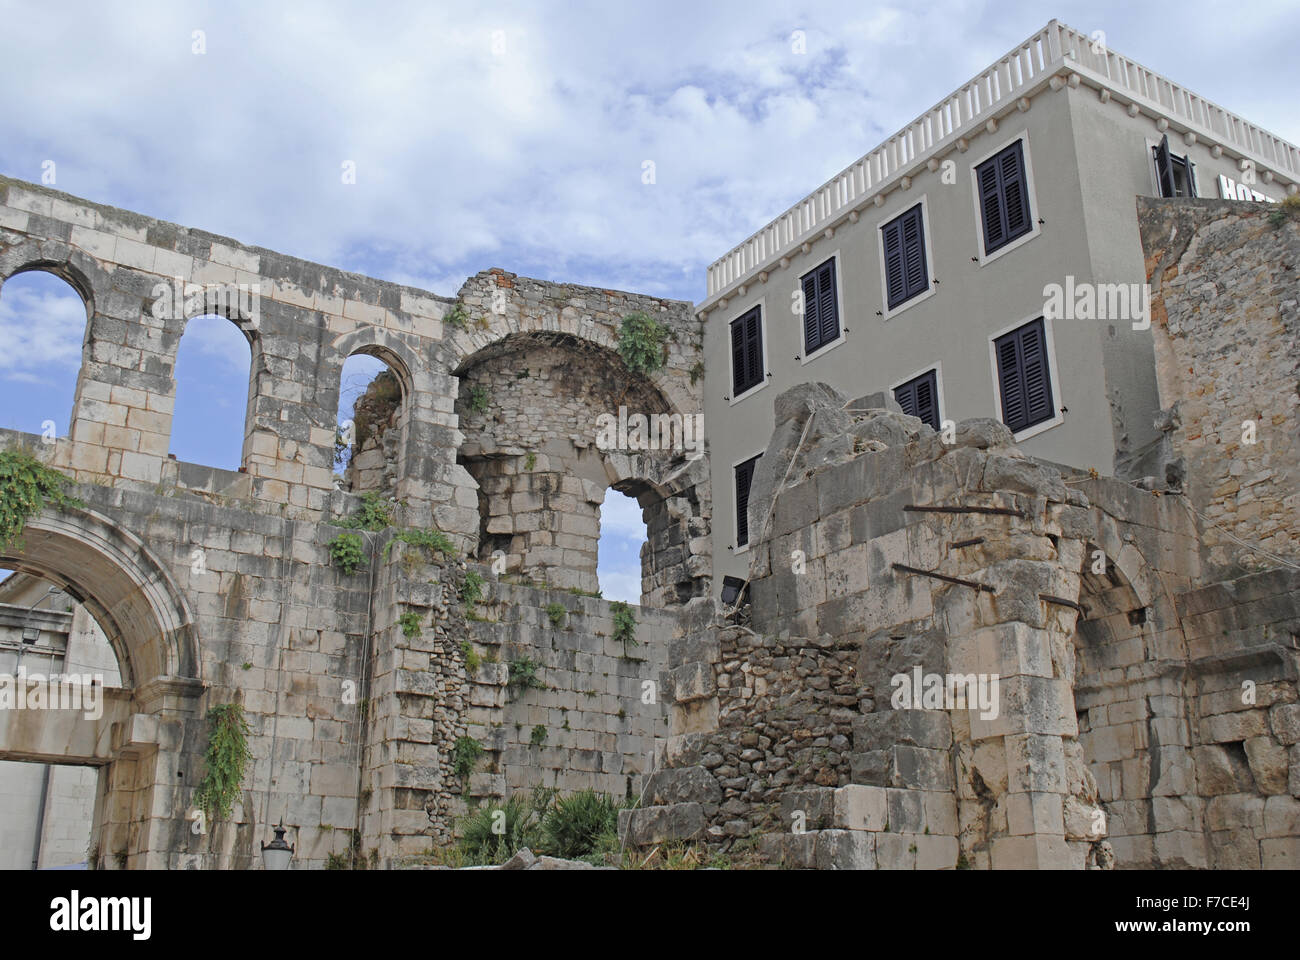 The remains of the ancient Diocletian's Palace in Split, Croatia, under the protection of UNESCO. Stock Photo